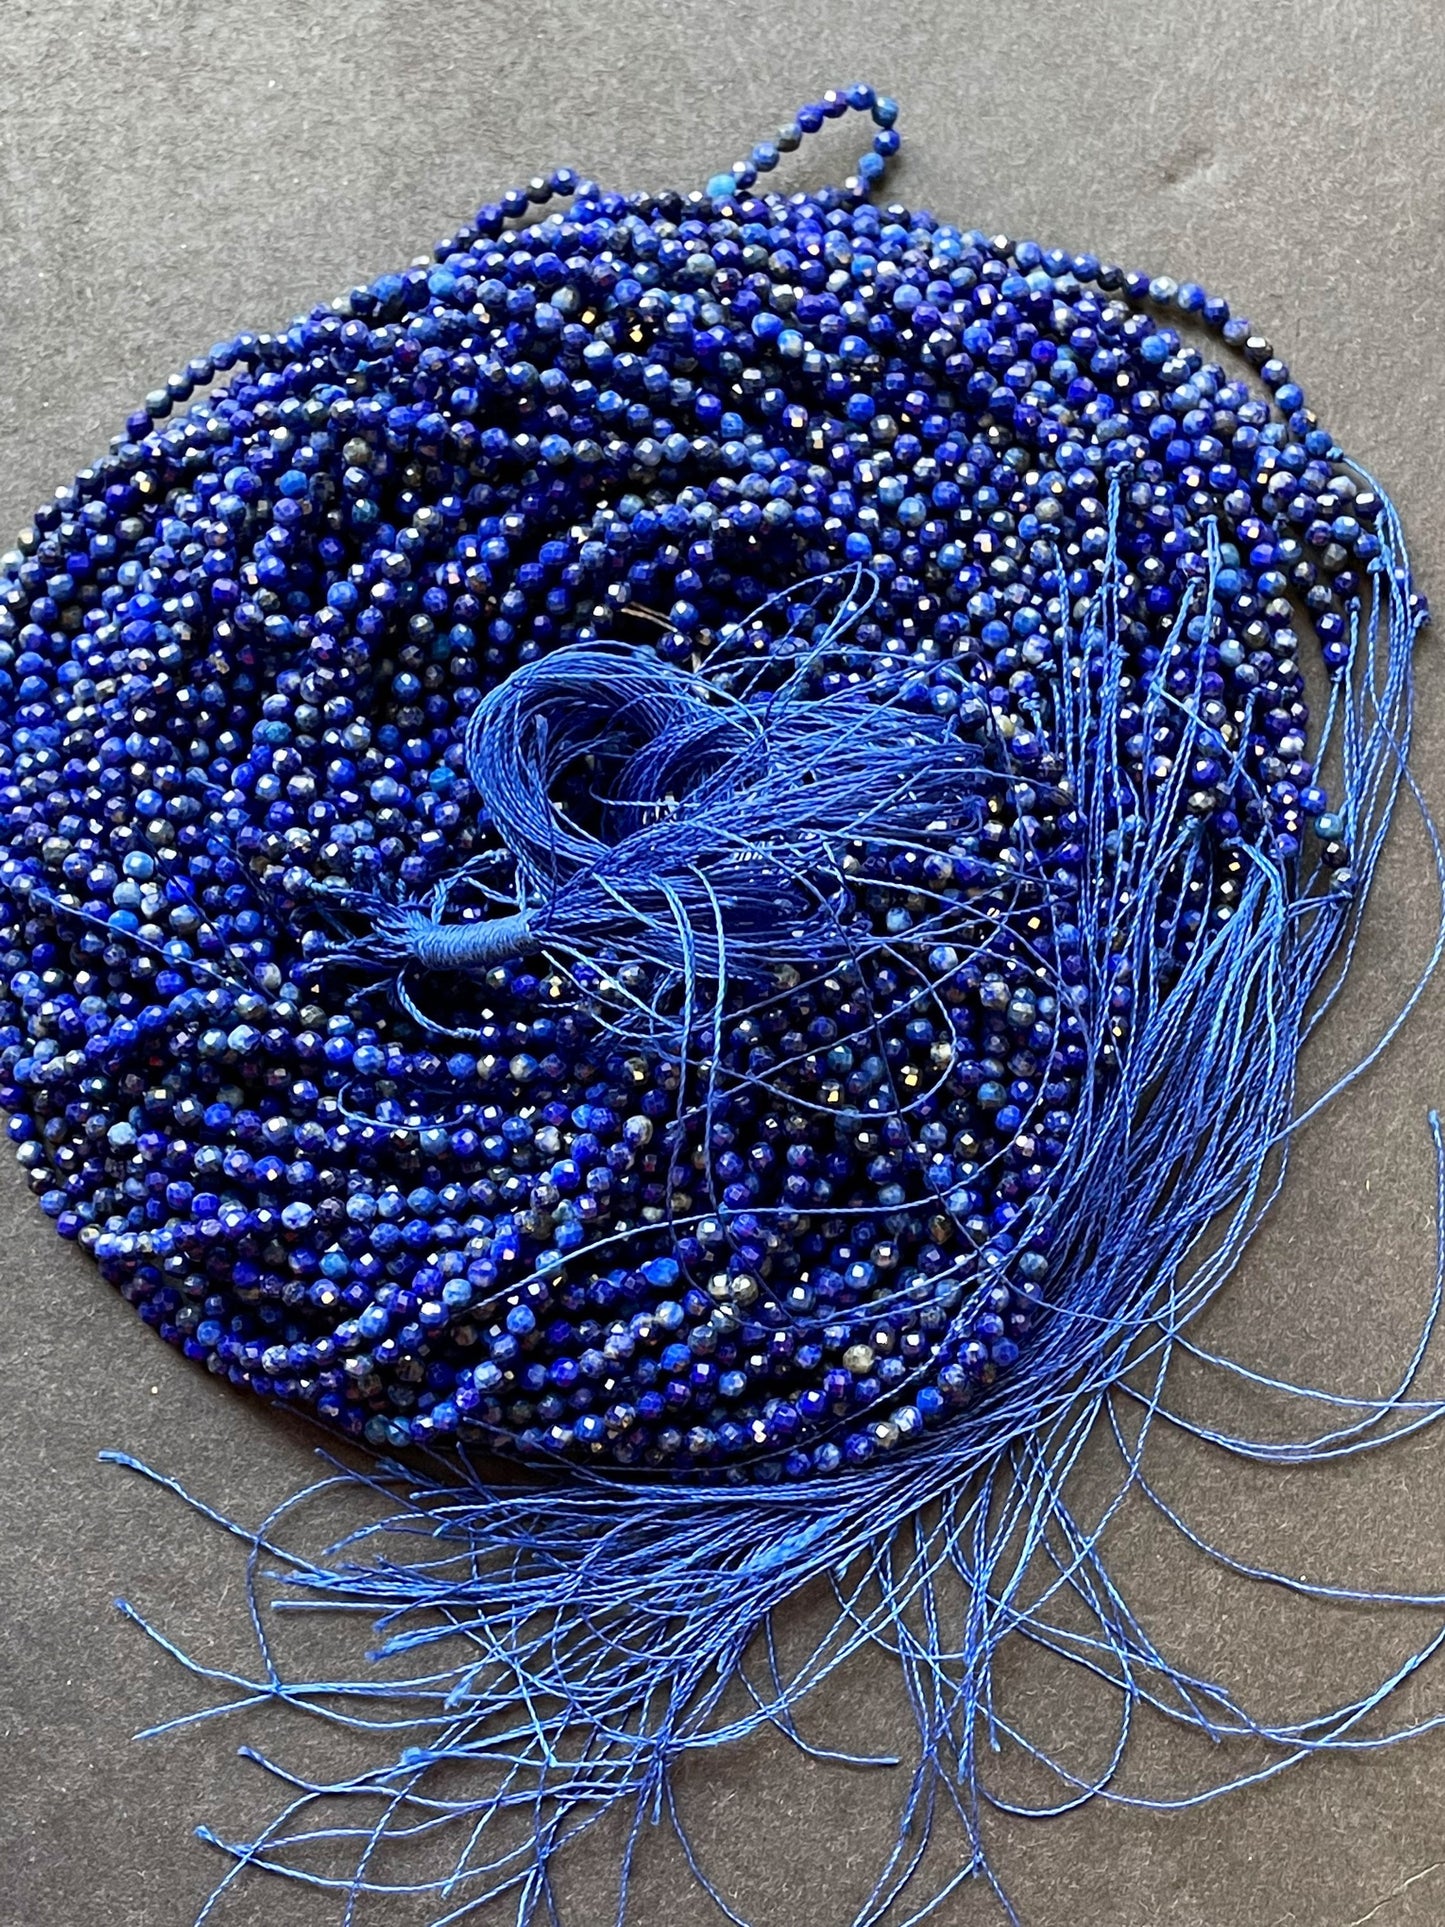 AAA Natural Lapis Lazuli Gemstone Bead Faceted 2mm Round Beads, Gorgeous Natural Royal Blue Color Lapis Lazuli Gemstone Beads